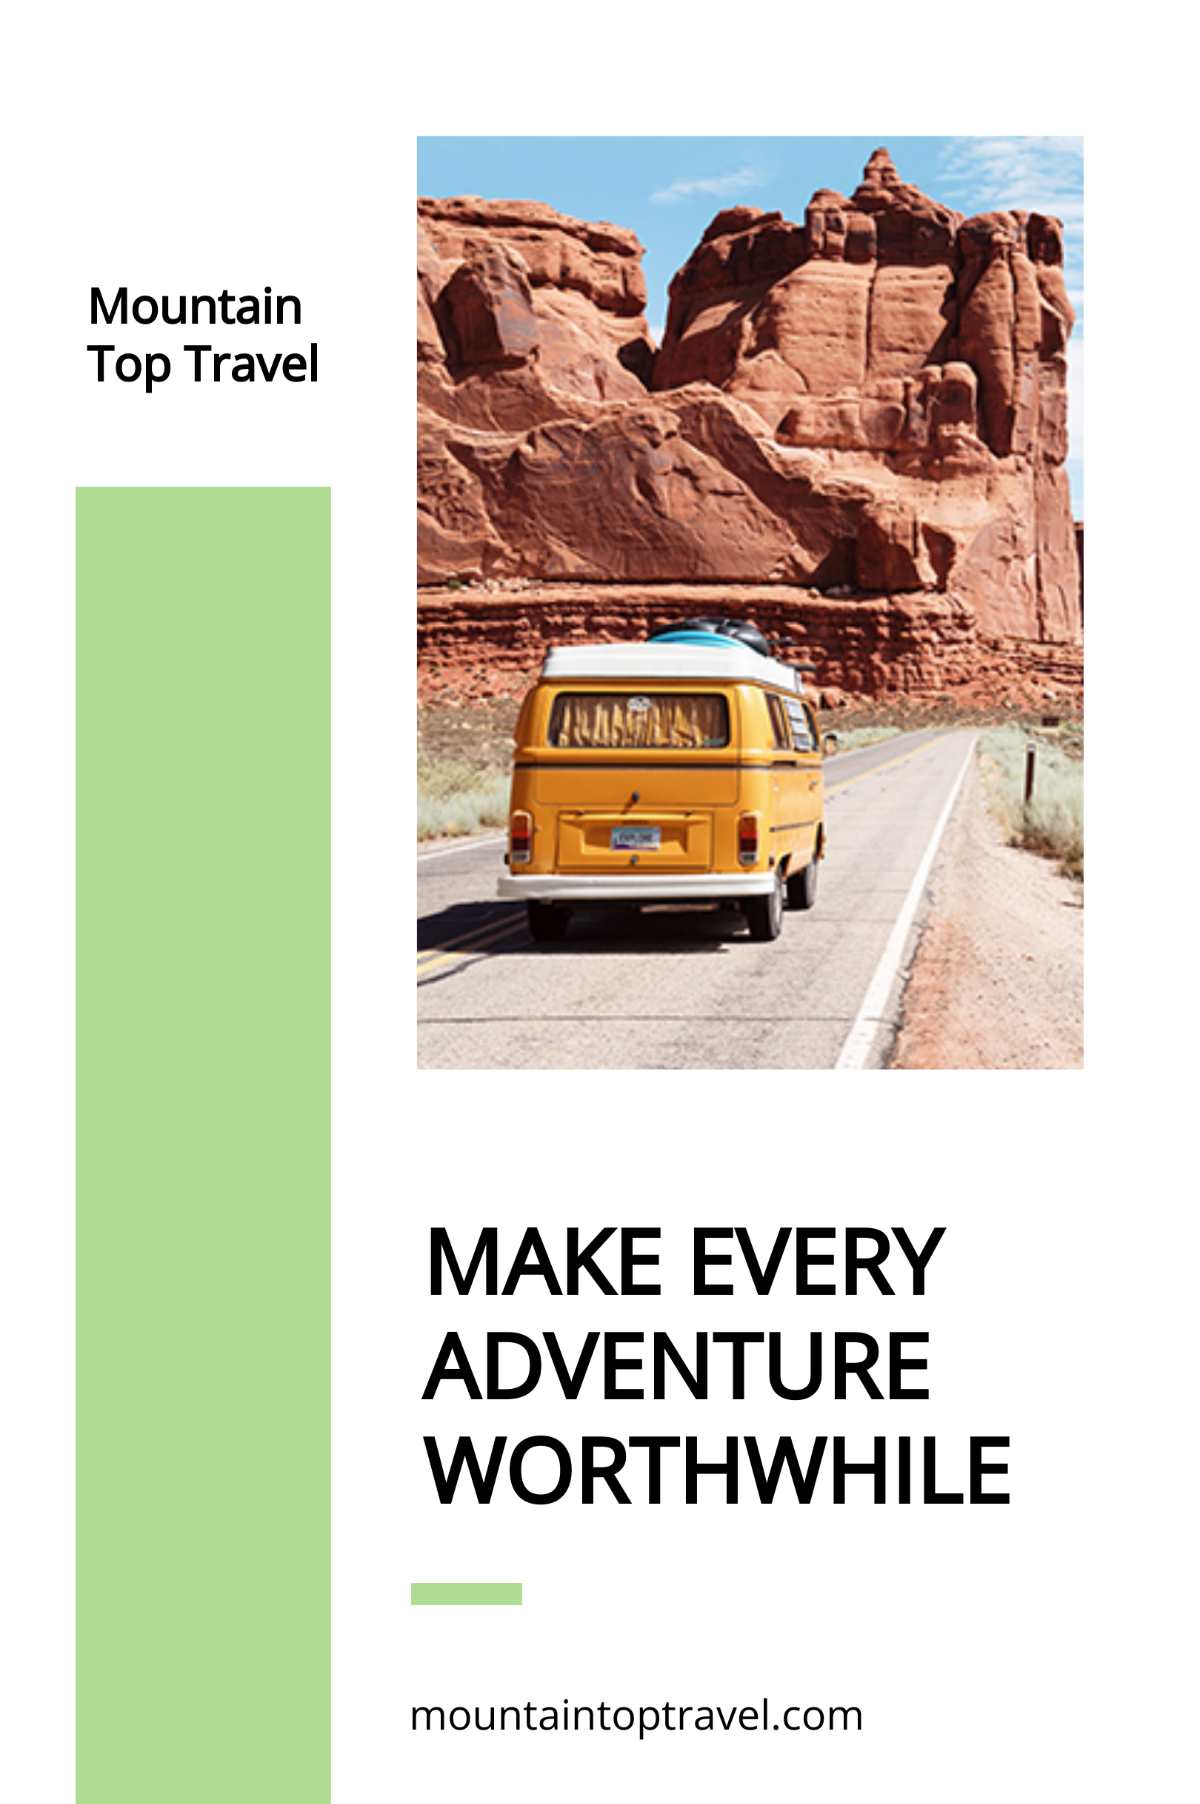 Travel Agency Tumblr Post Template